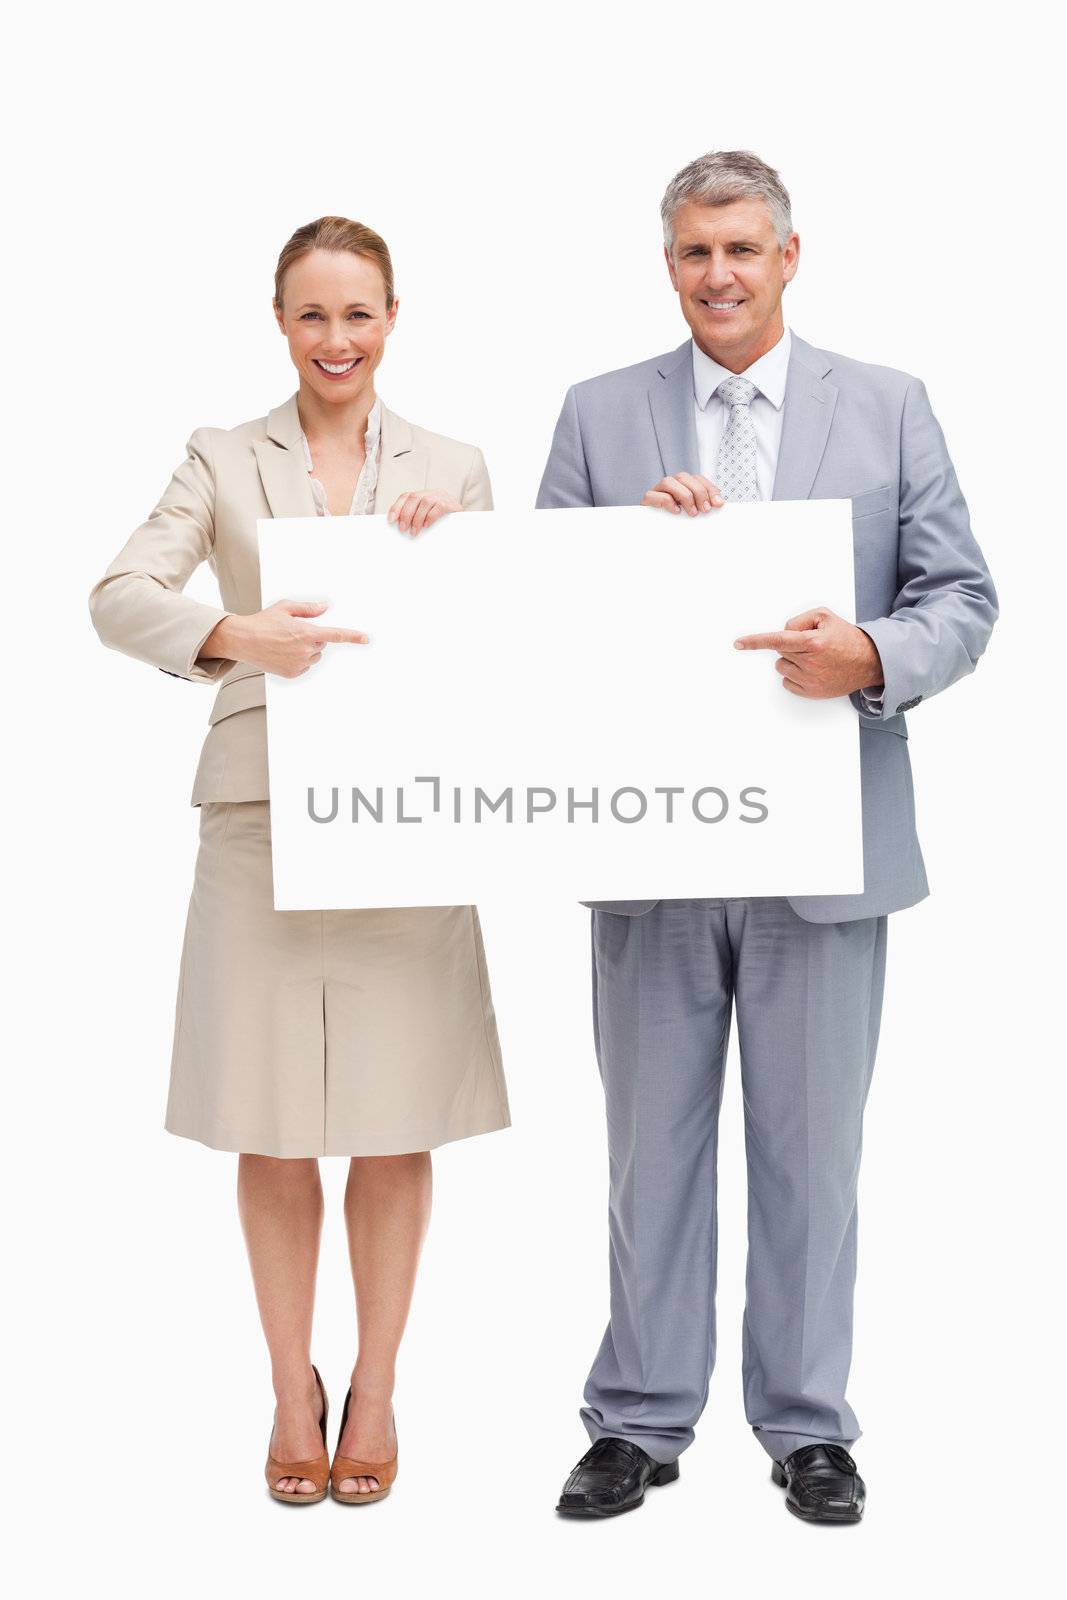 Business people showing a poster against white background